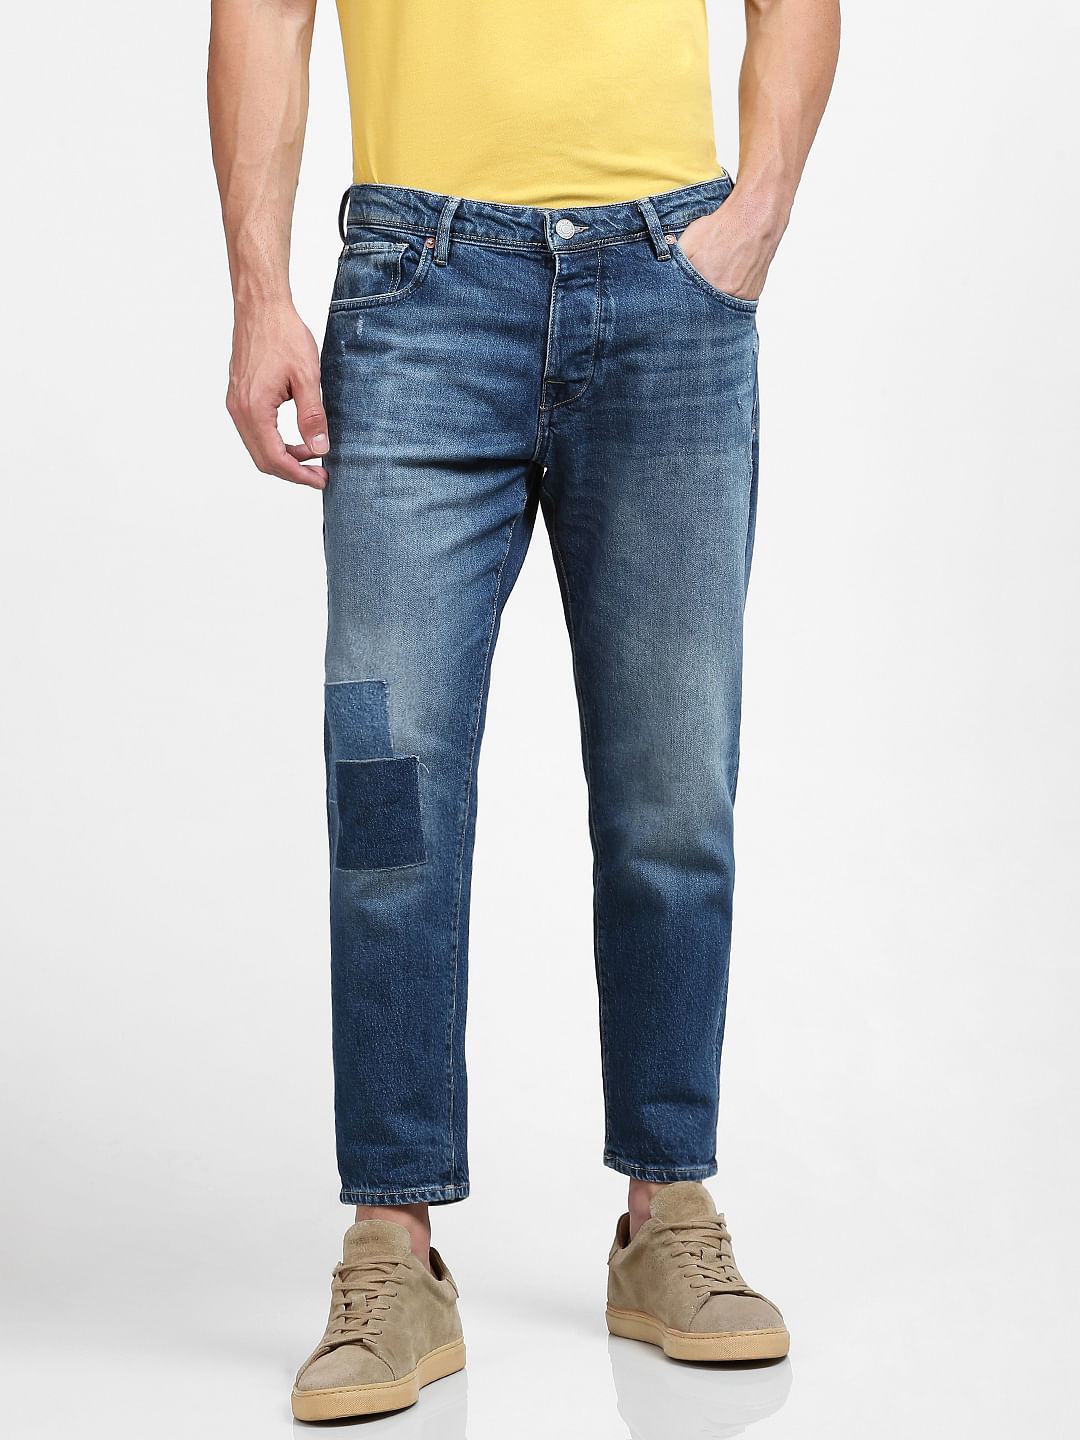 Buy Blue Ripped Jeans Men In India At Best Prices Online | Tata CLiQ